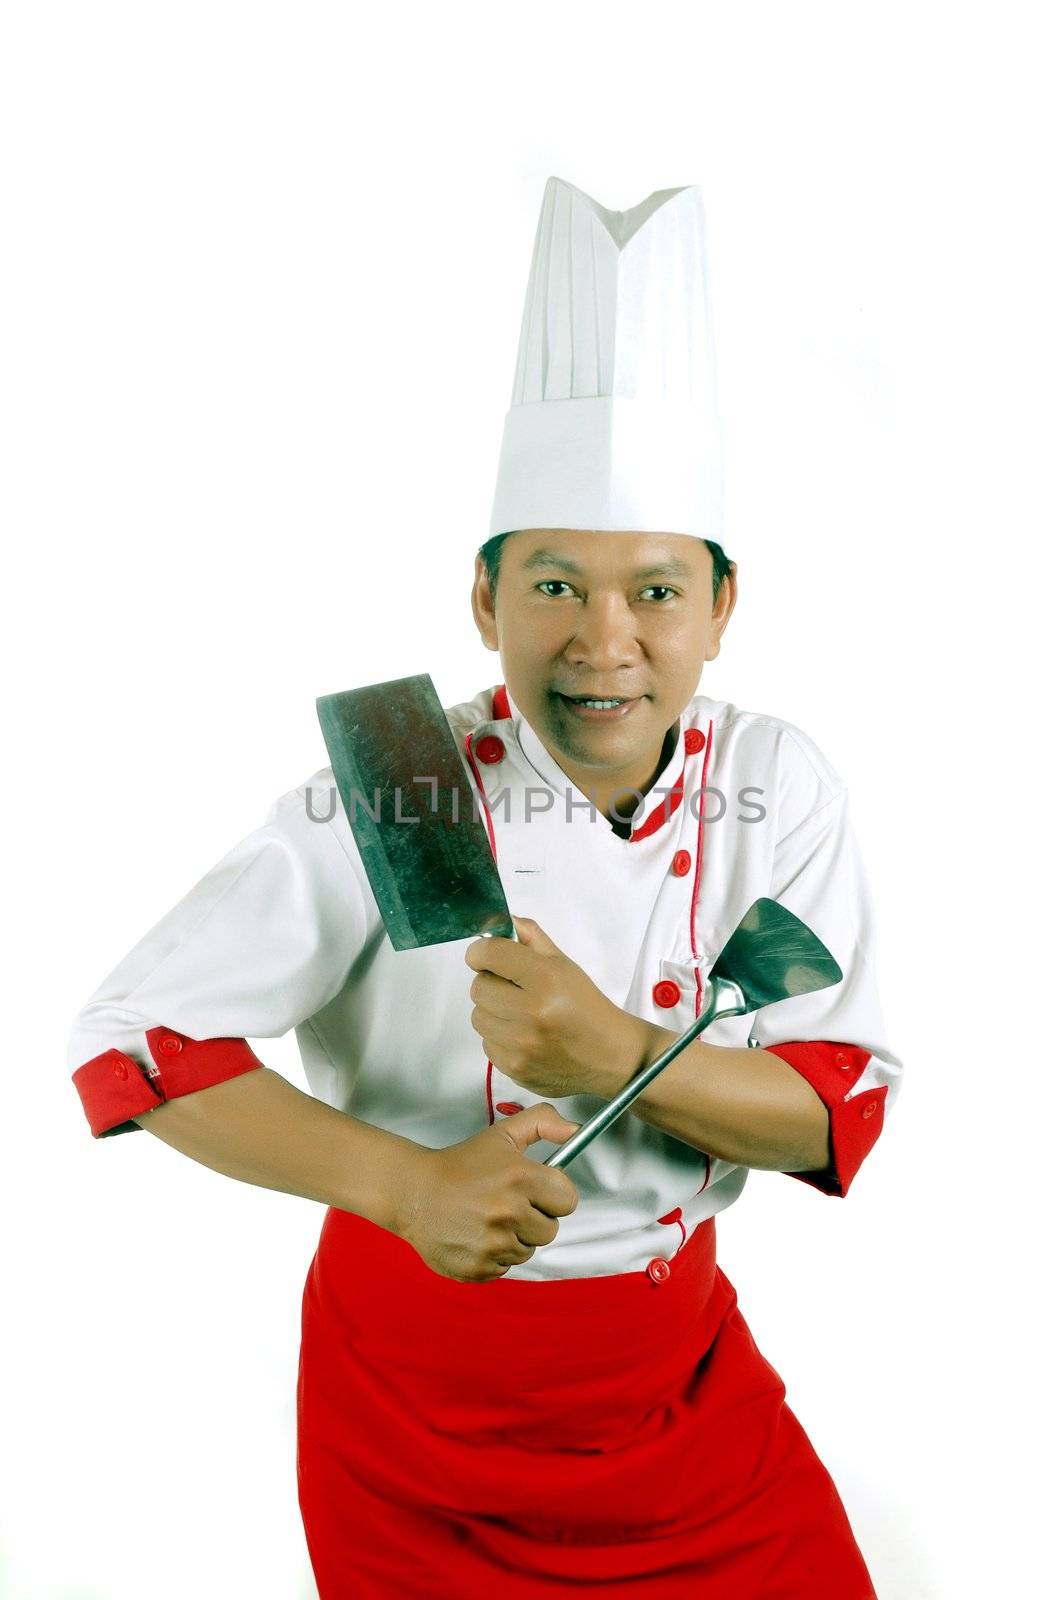 chef holding cooking utensils and kitchen knife isolated on white background